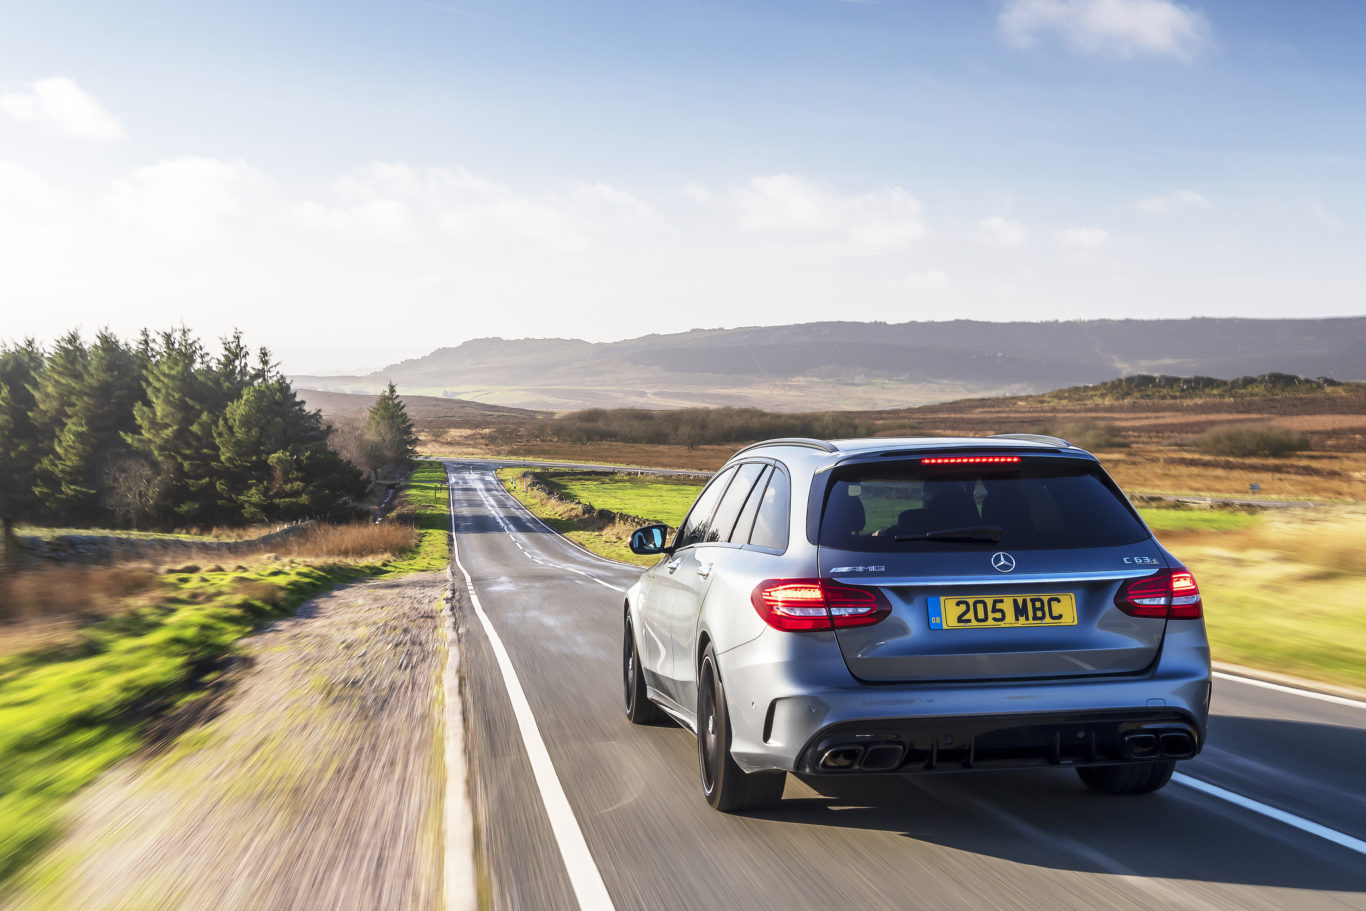 The C63 is well-suited to the UK's roads